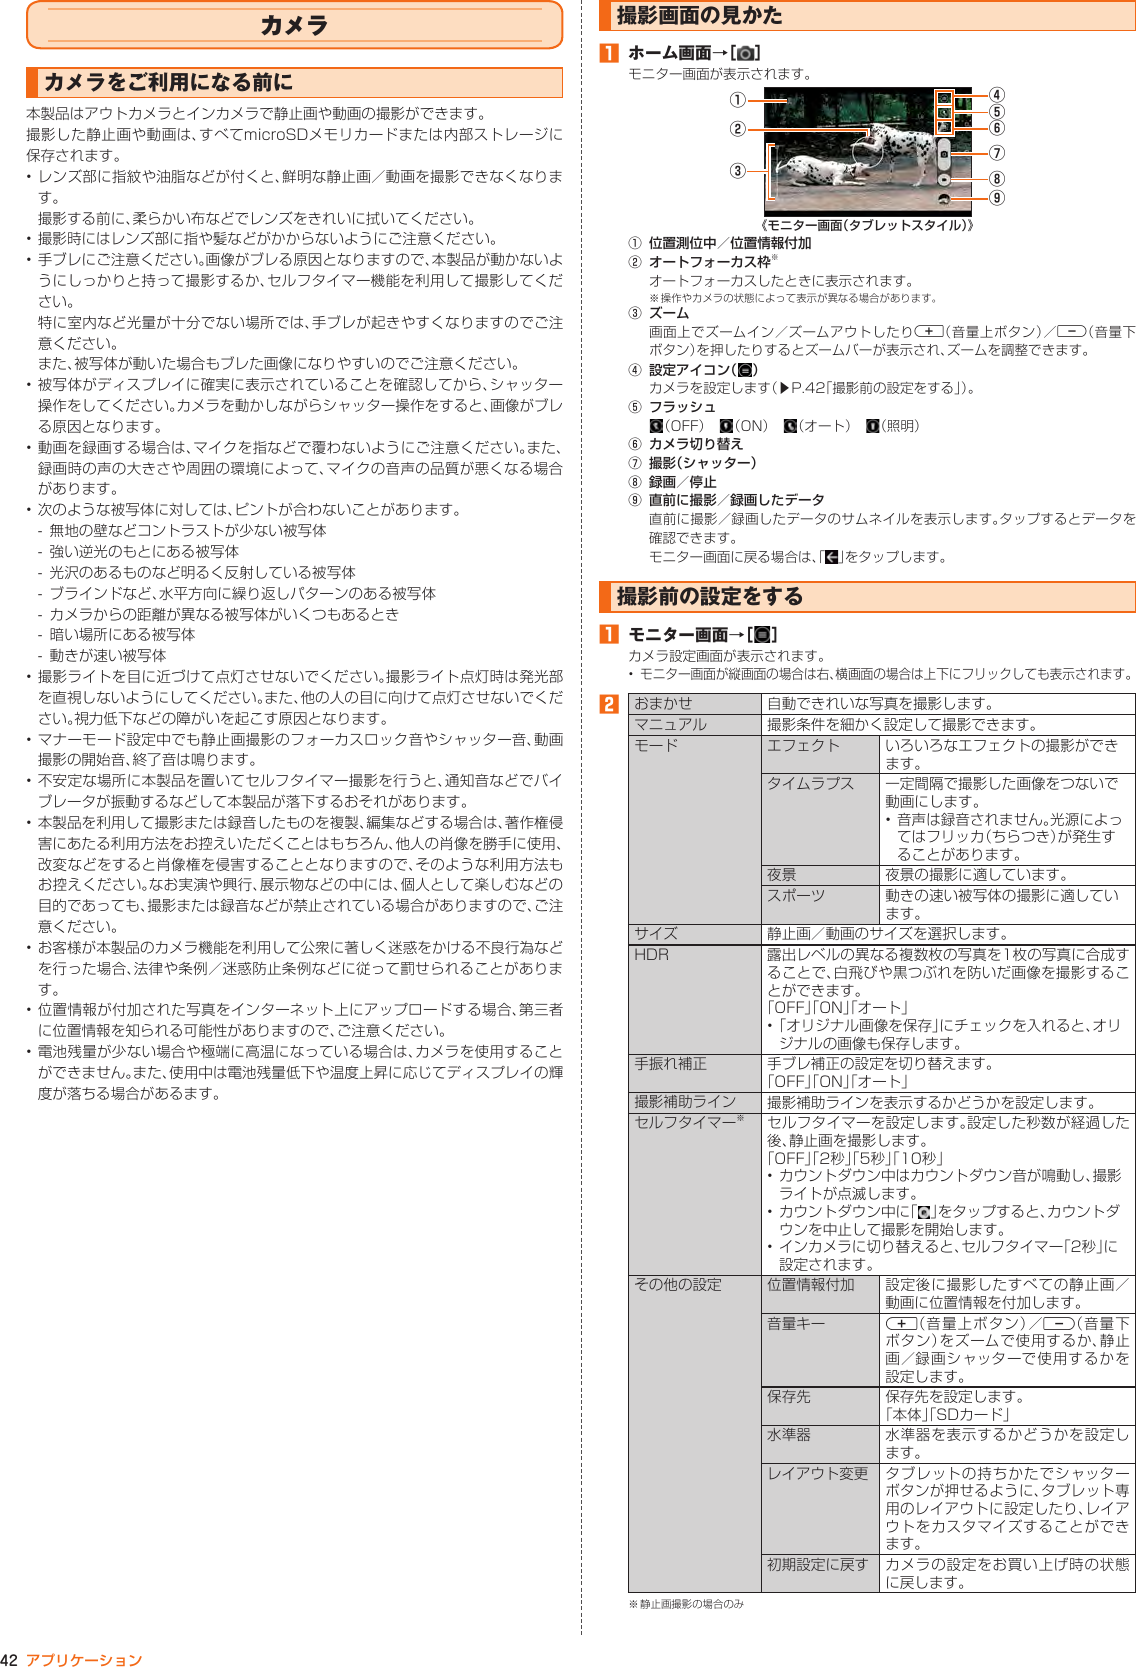 Page 38 of Kyocera FA51 Tablet User Manual part 2